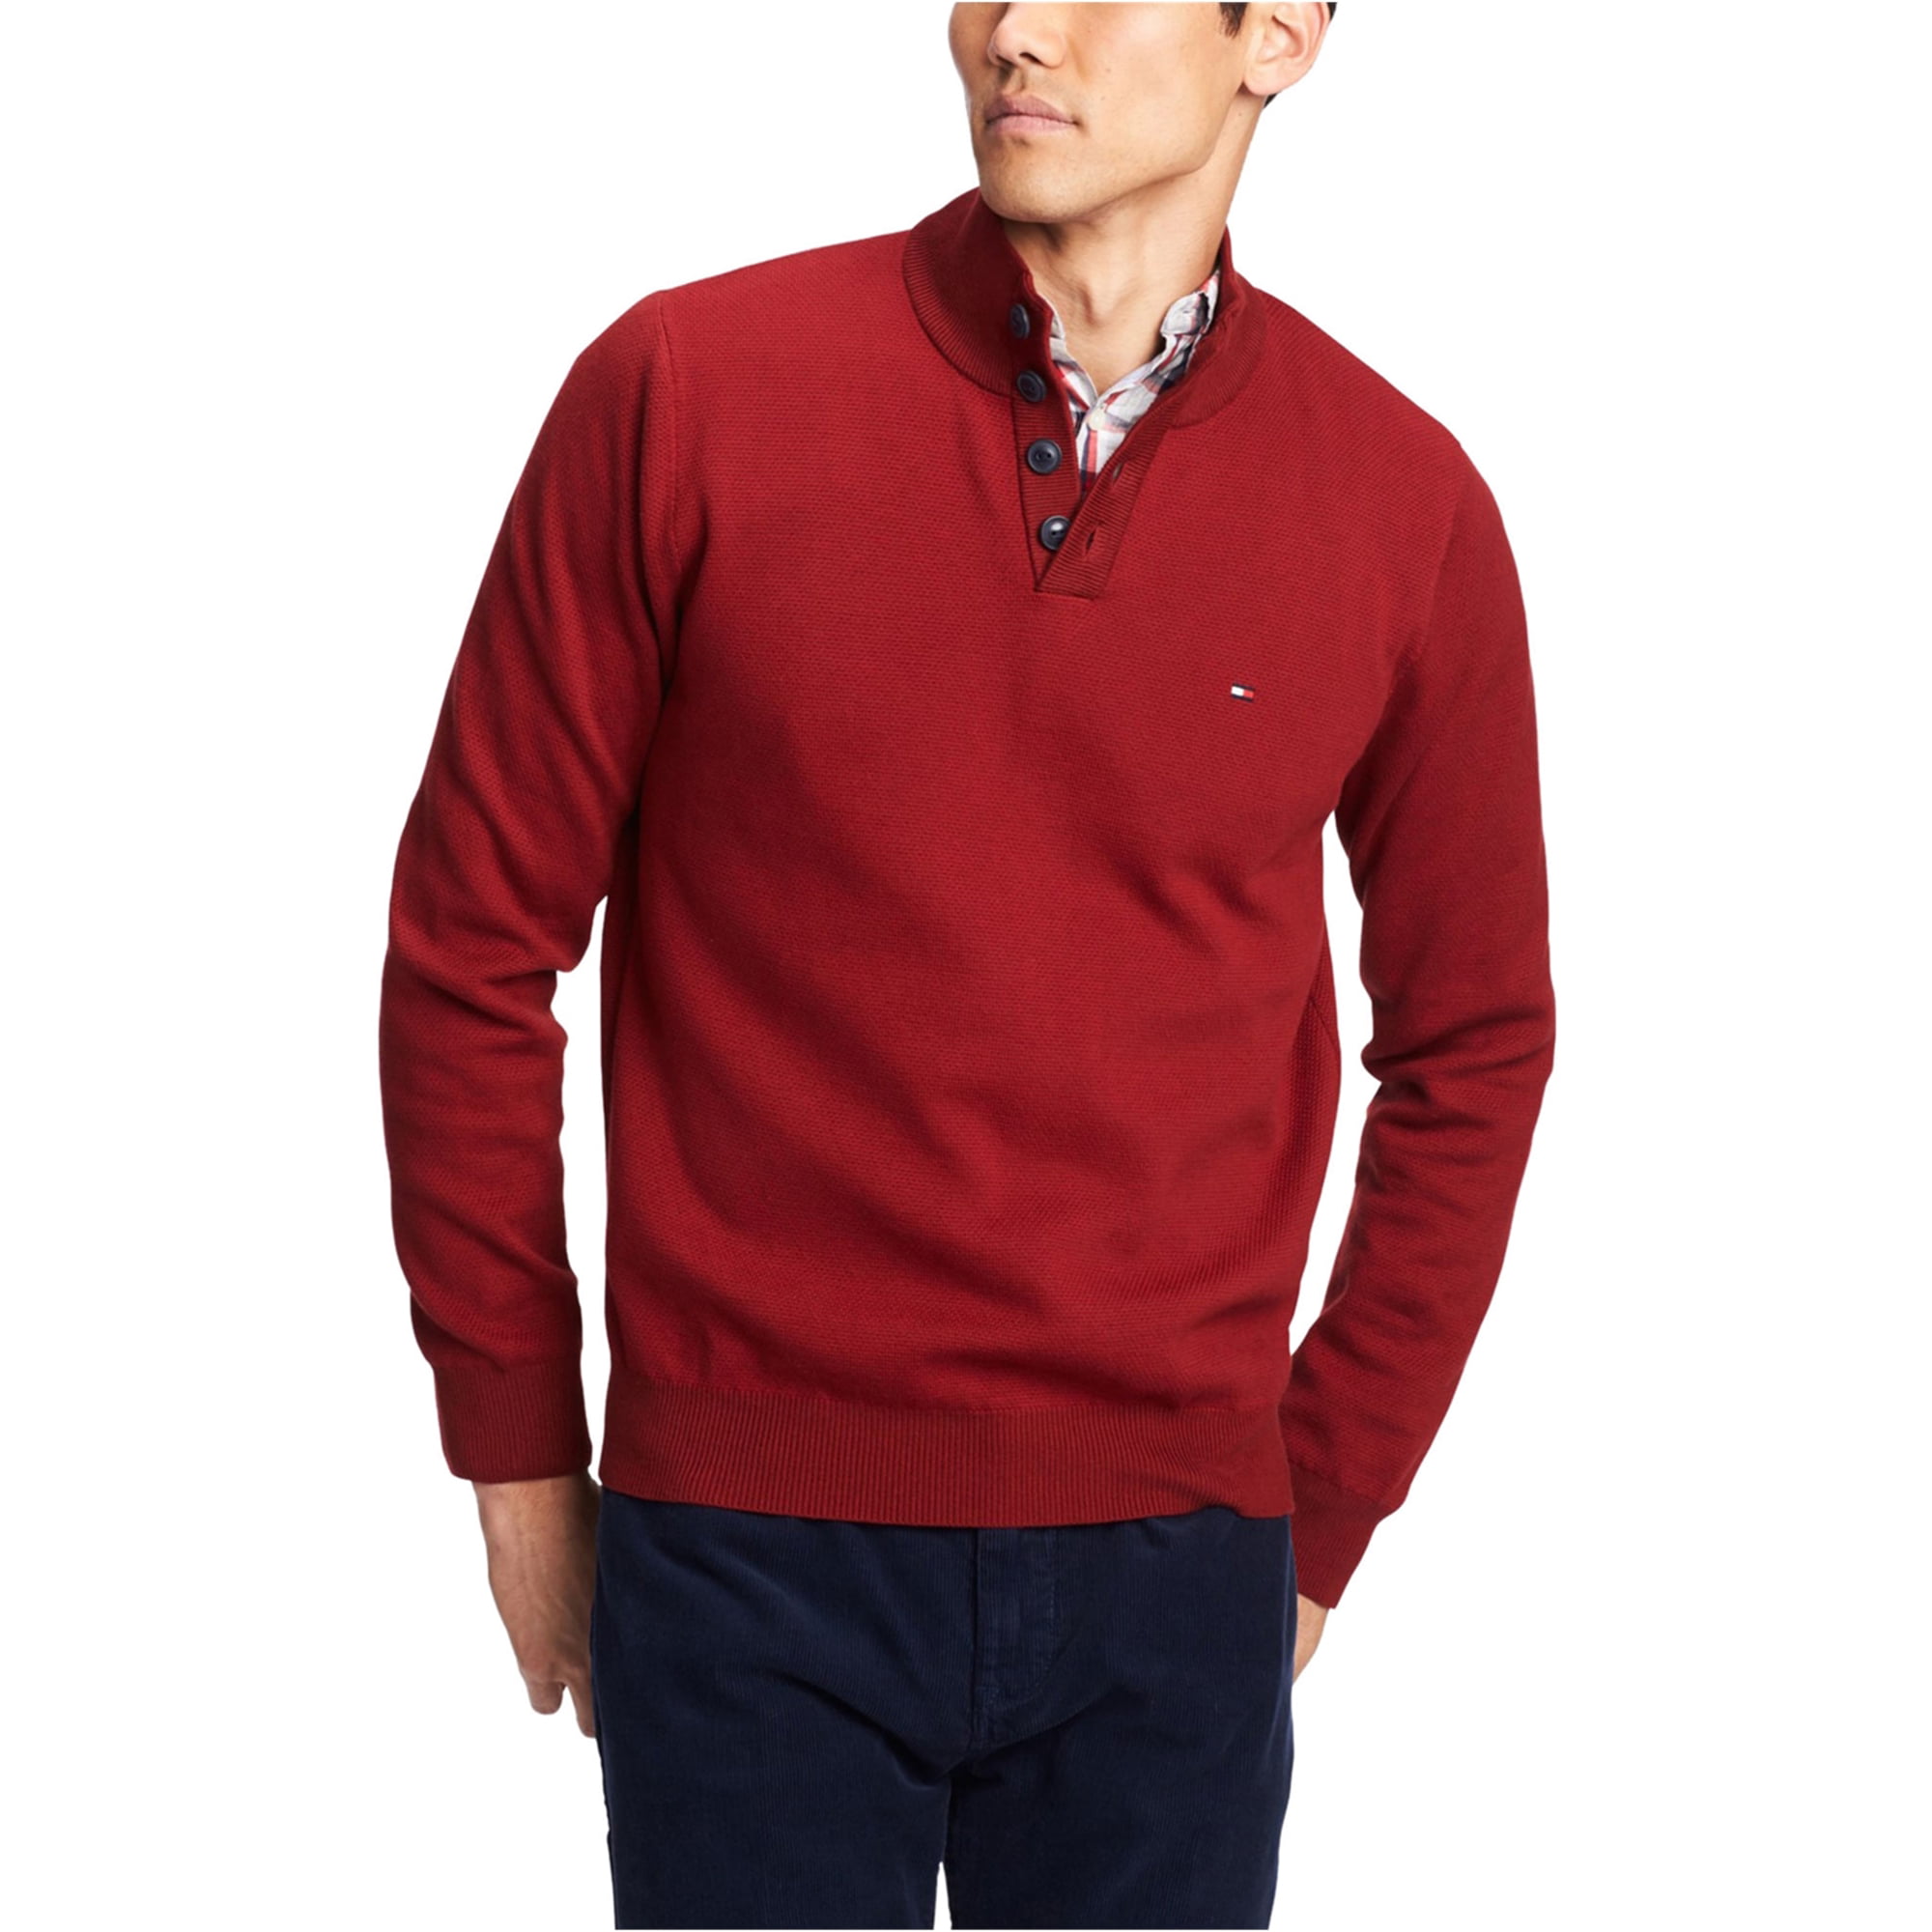 Nicelly Mens Knitting 2-Stripe Stand Collar Contrast Color Classic Pullovers Sweater 